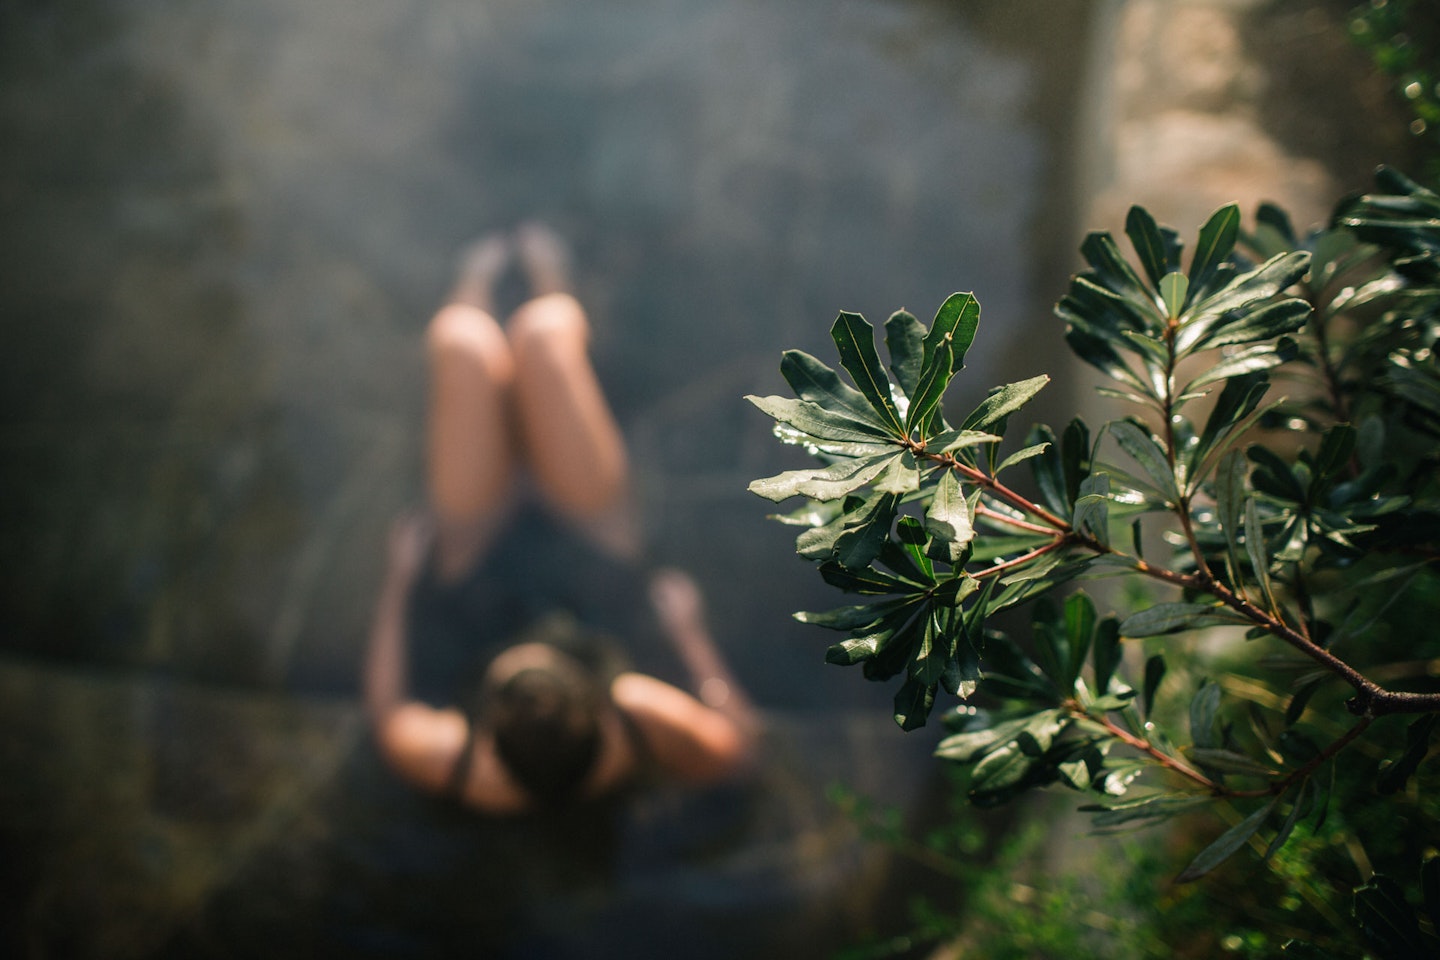 bird's eye view of lady in bathing suit sitting in geothermal pool with foliage in foreground